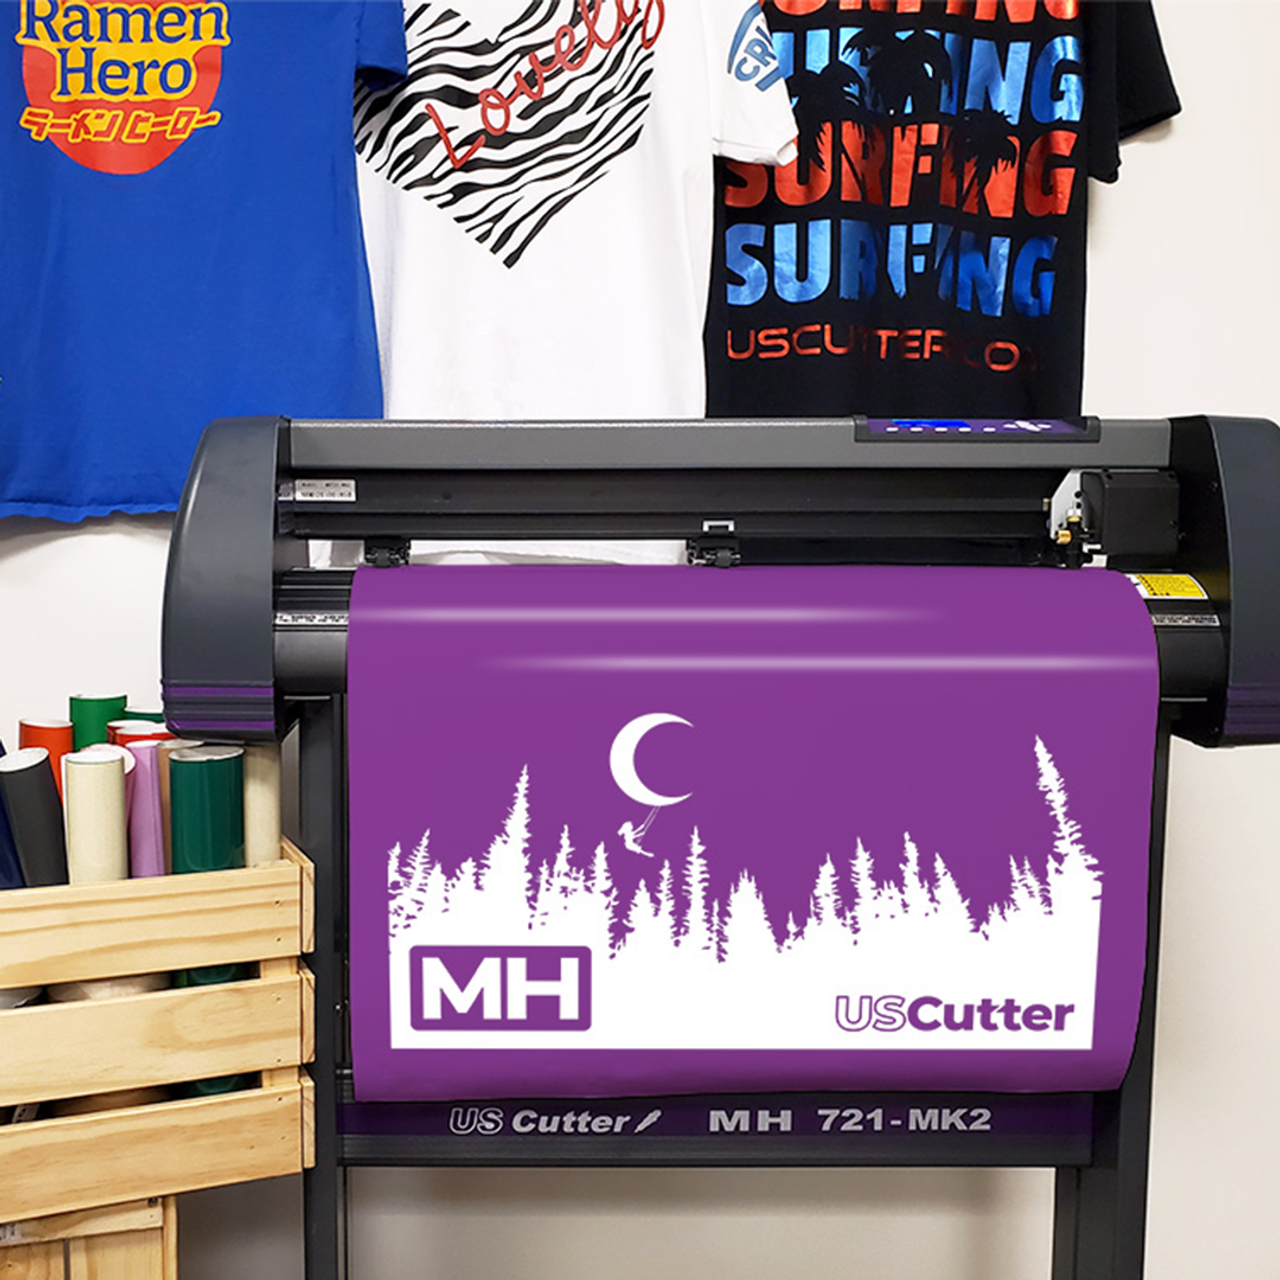 USCutter 34 inch MH 871 Vinyl Cutter Kit with Software, Free Video Training  Course, Starter Signmaking Kit